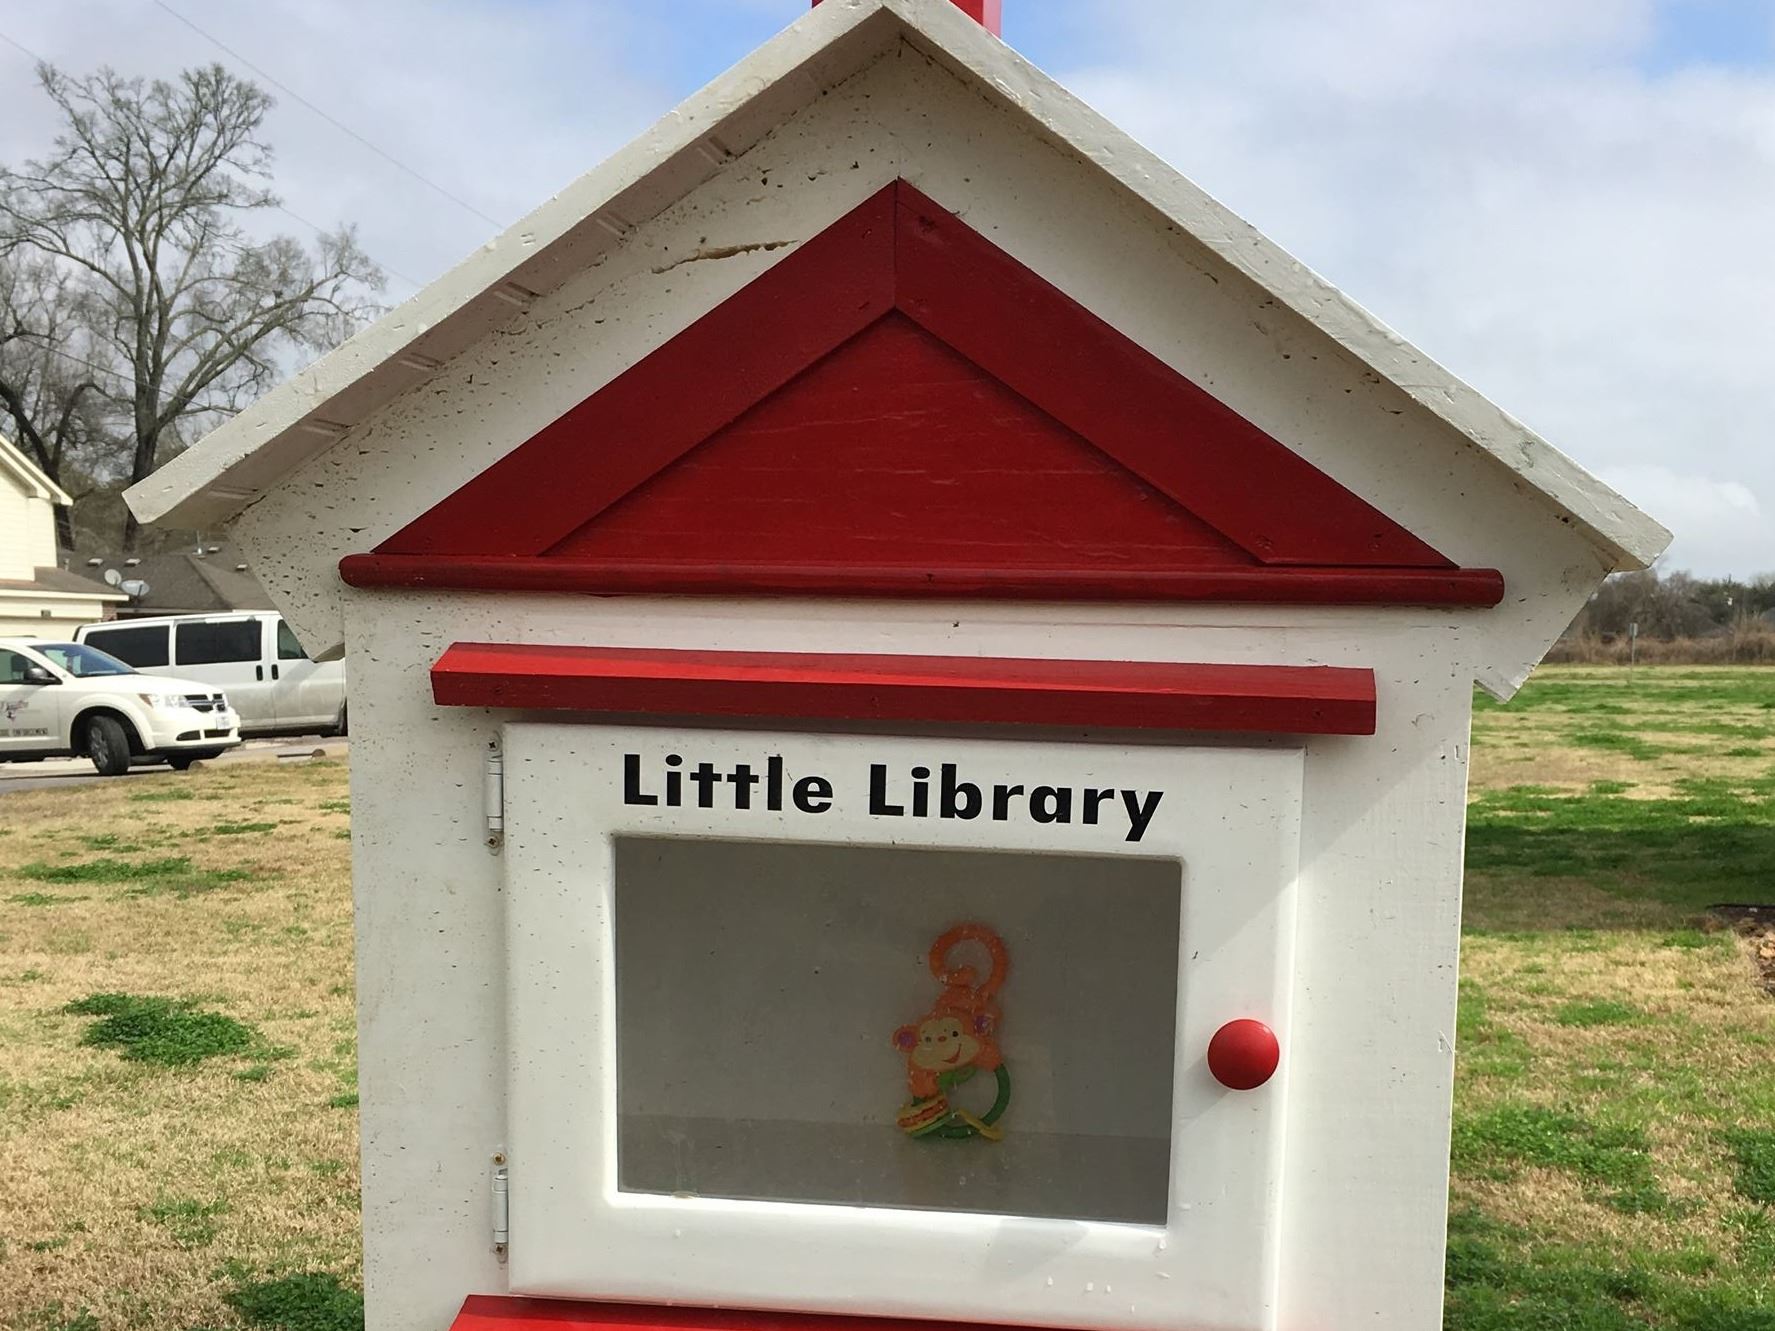 Little Library box with illustration